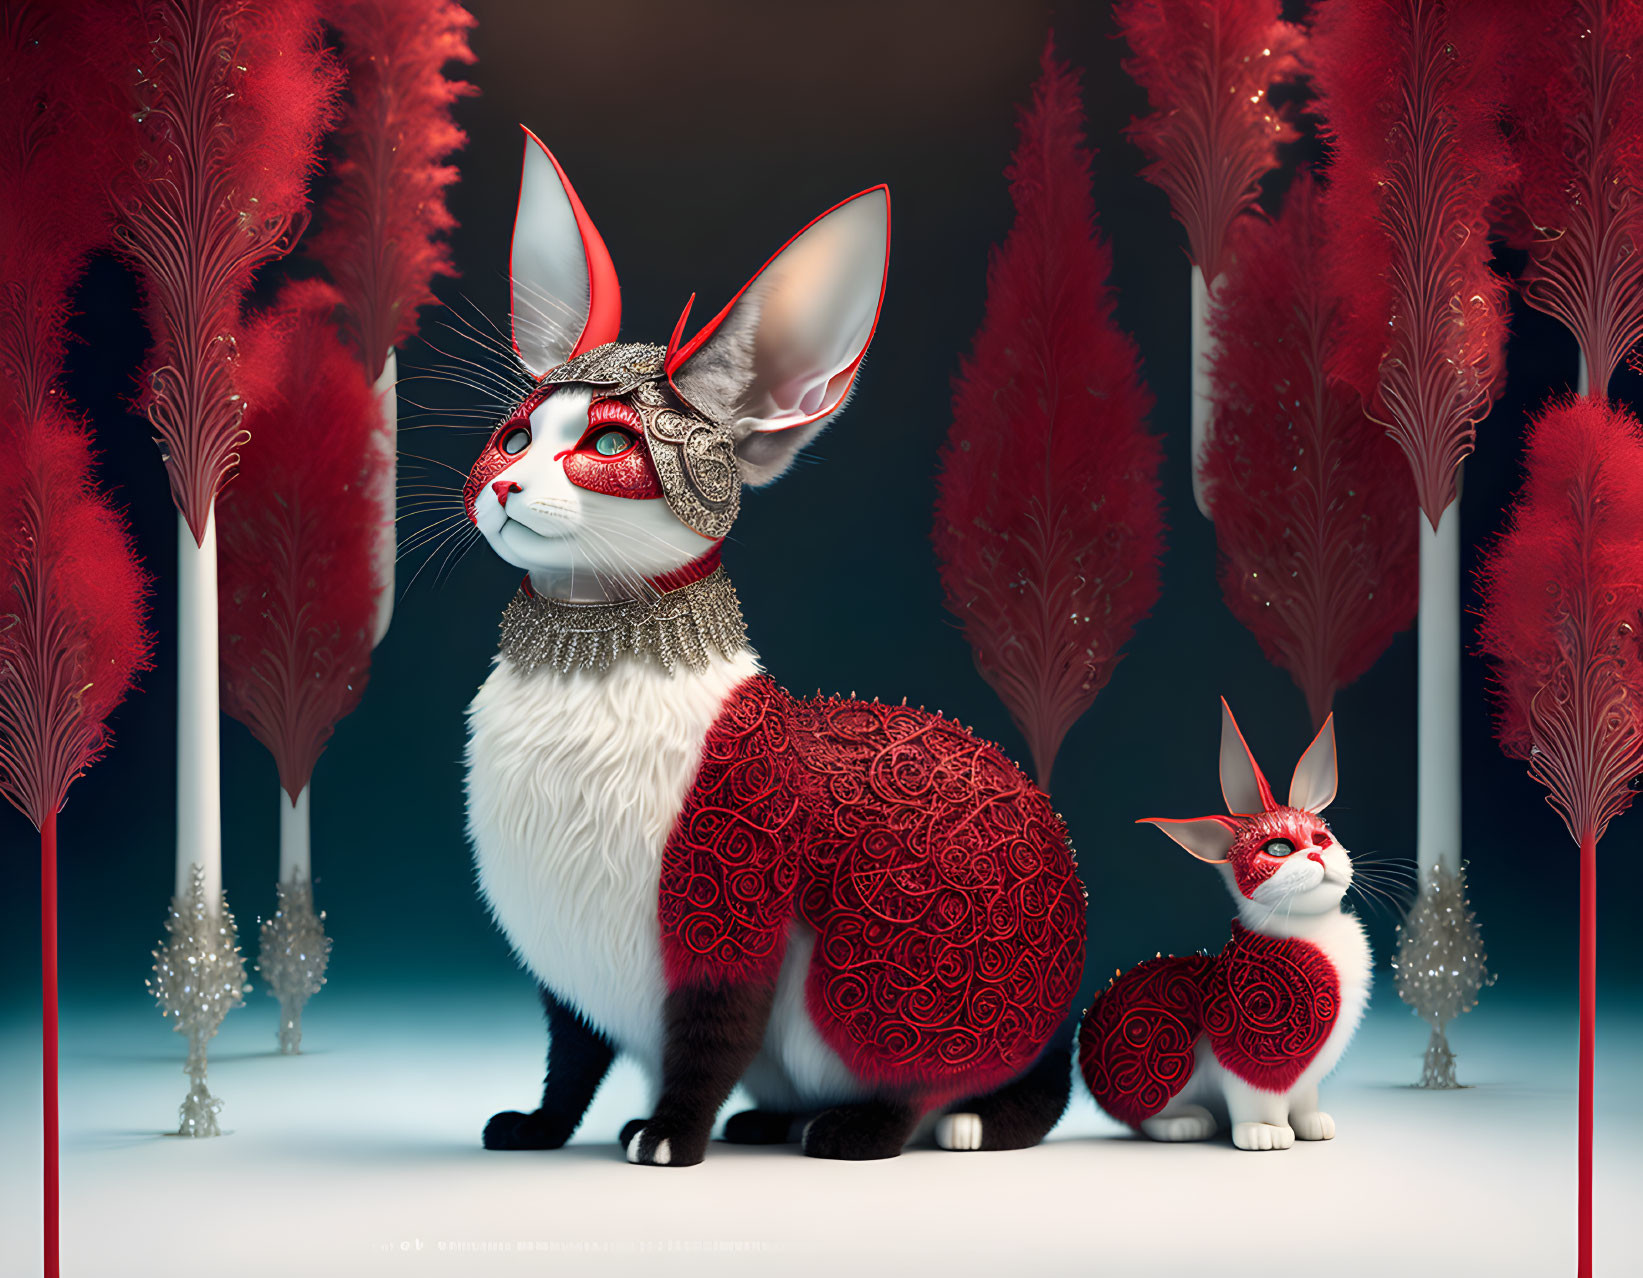 Stylized rabbits with red patterns and masks in mystical forest